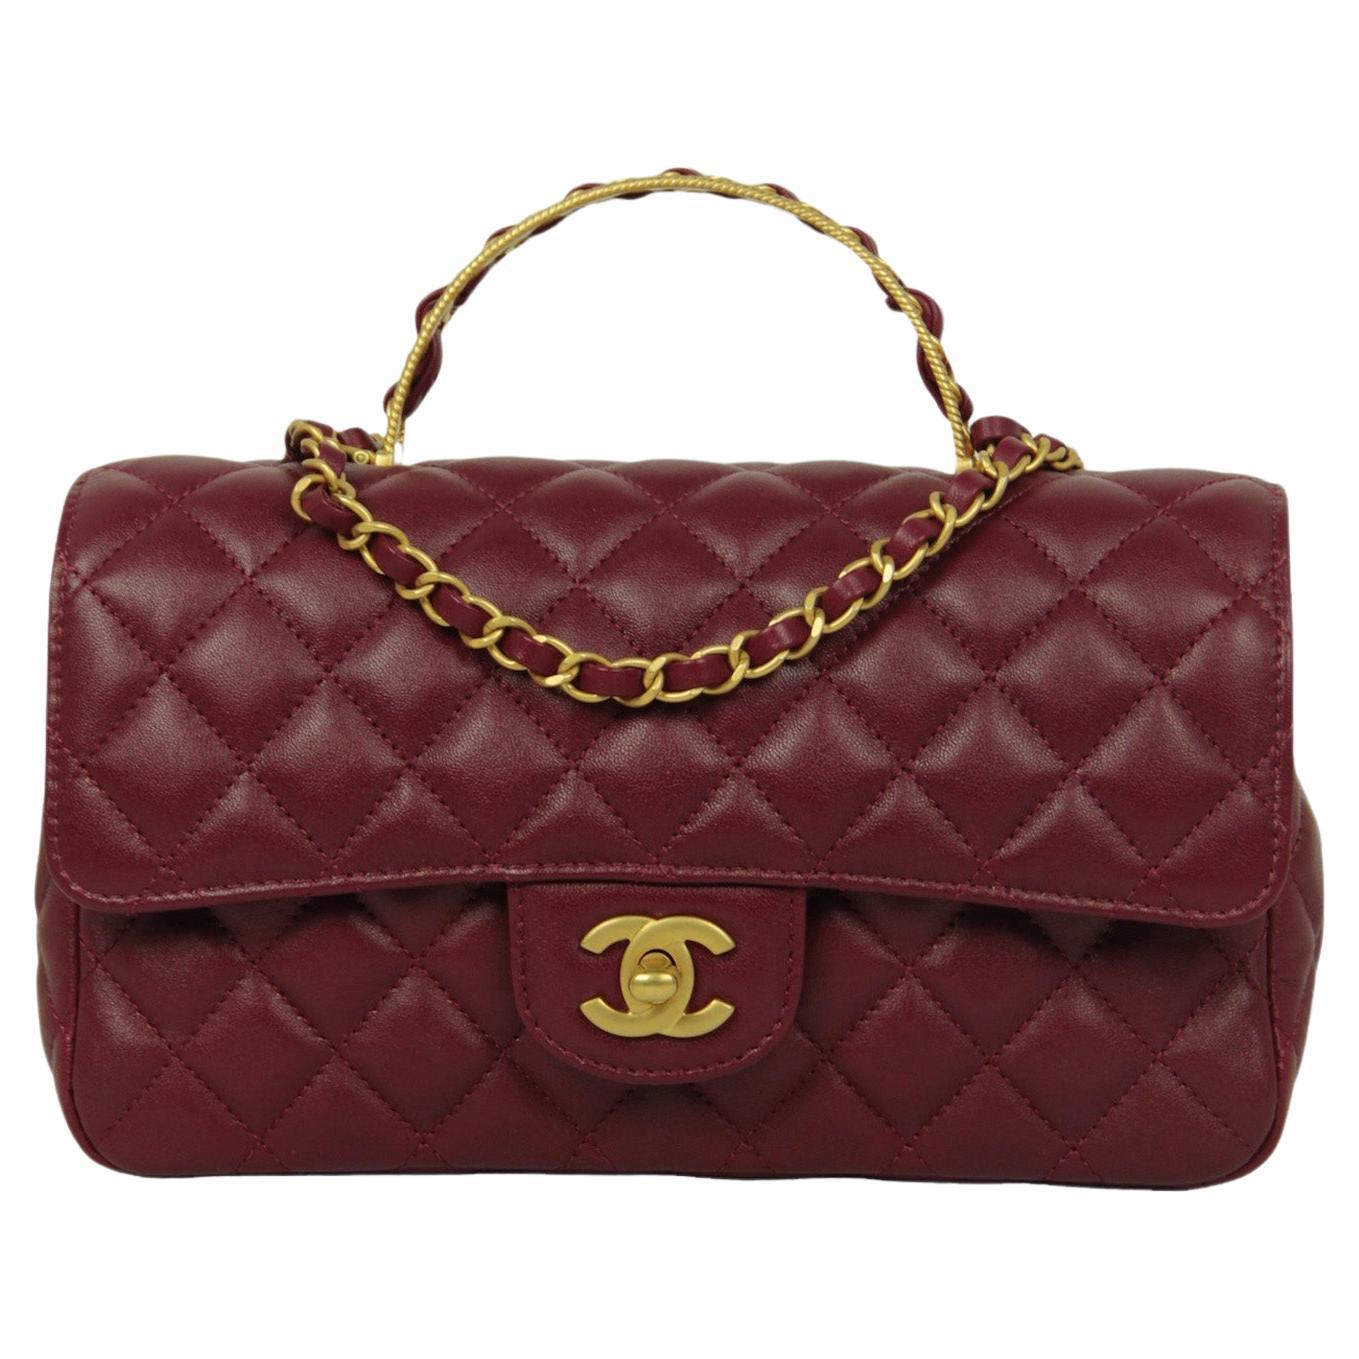 Chanel Burgundy Lambskin Leather Quilted Flapbag w/ Handle For Sale